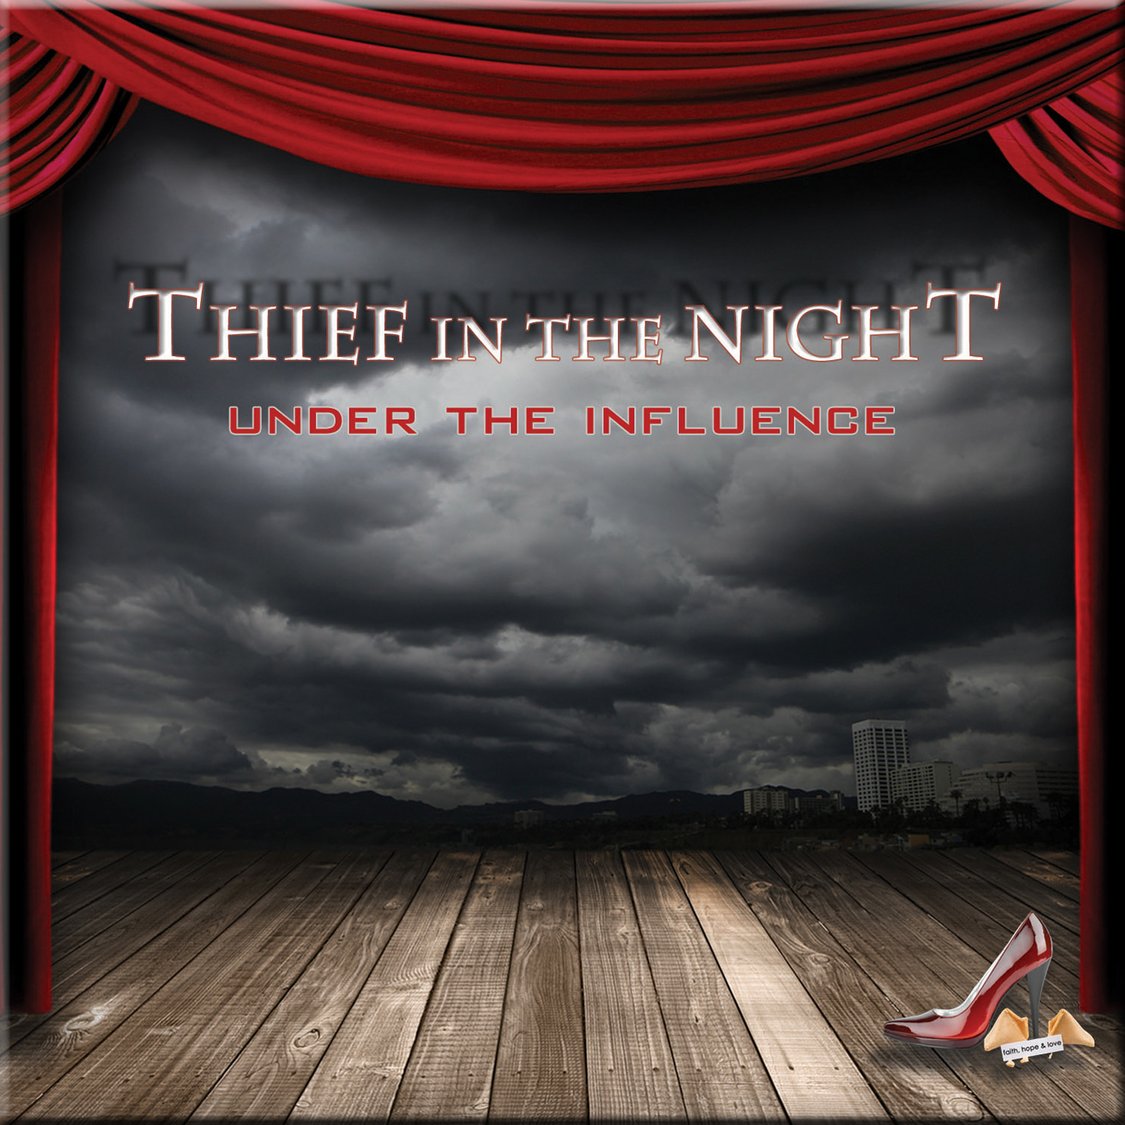 watch a thief in the night online free